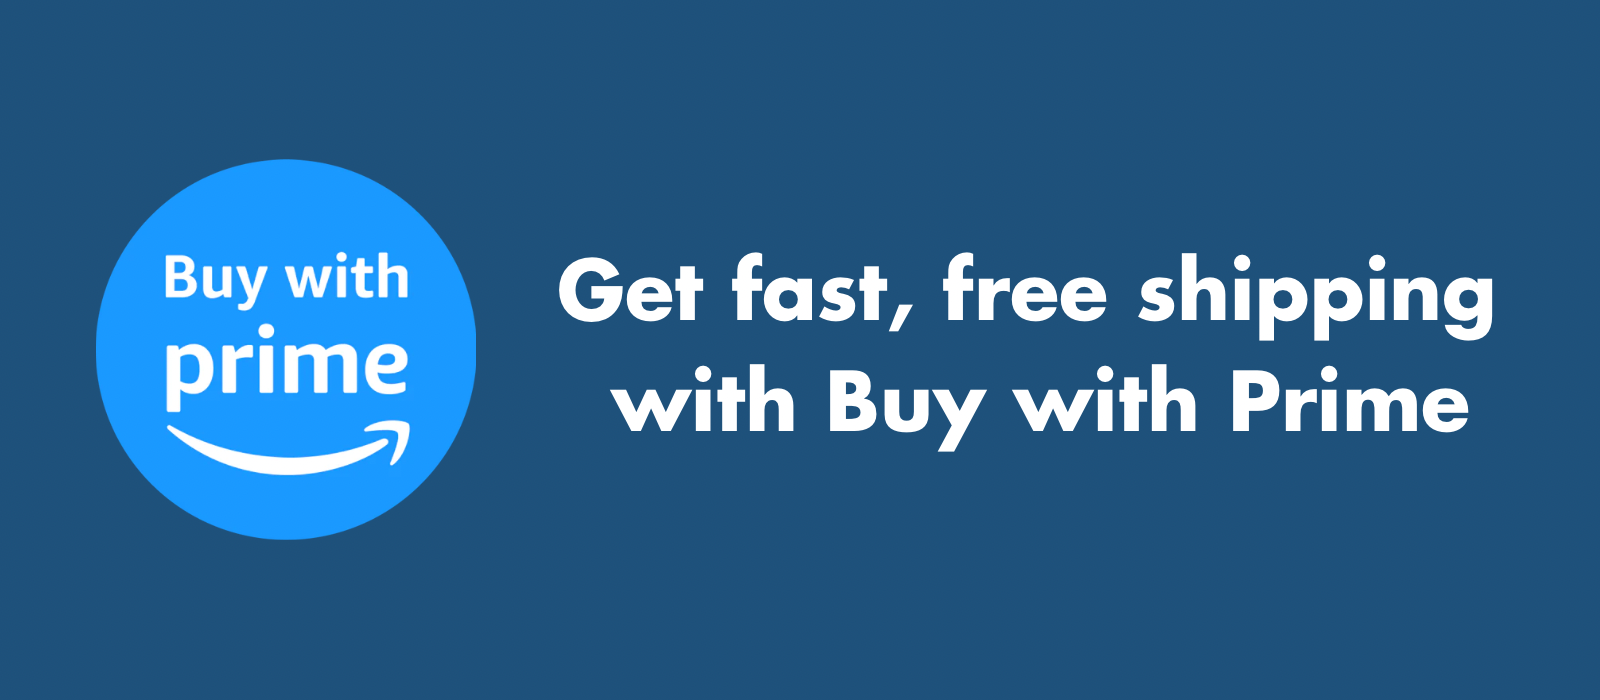 Get fast, free shipping with Buy with Prime